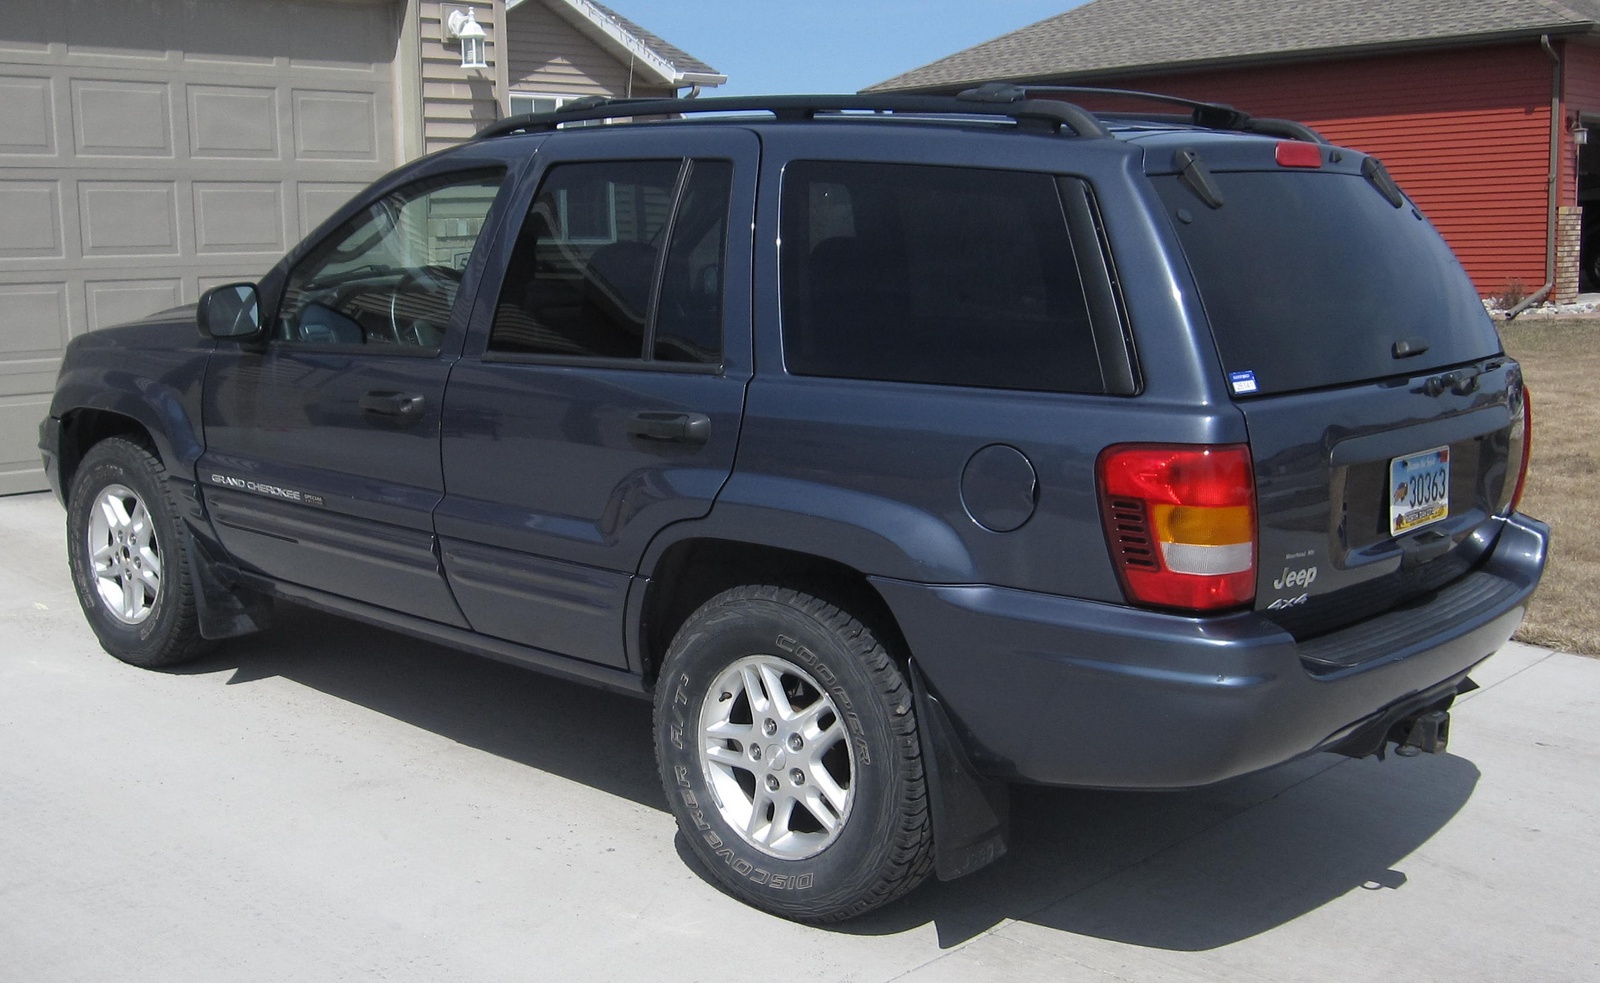 04 Jeep grand cherokee special edition specs #1